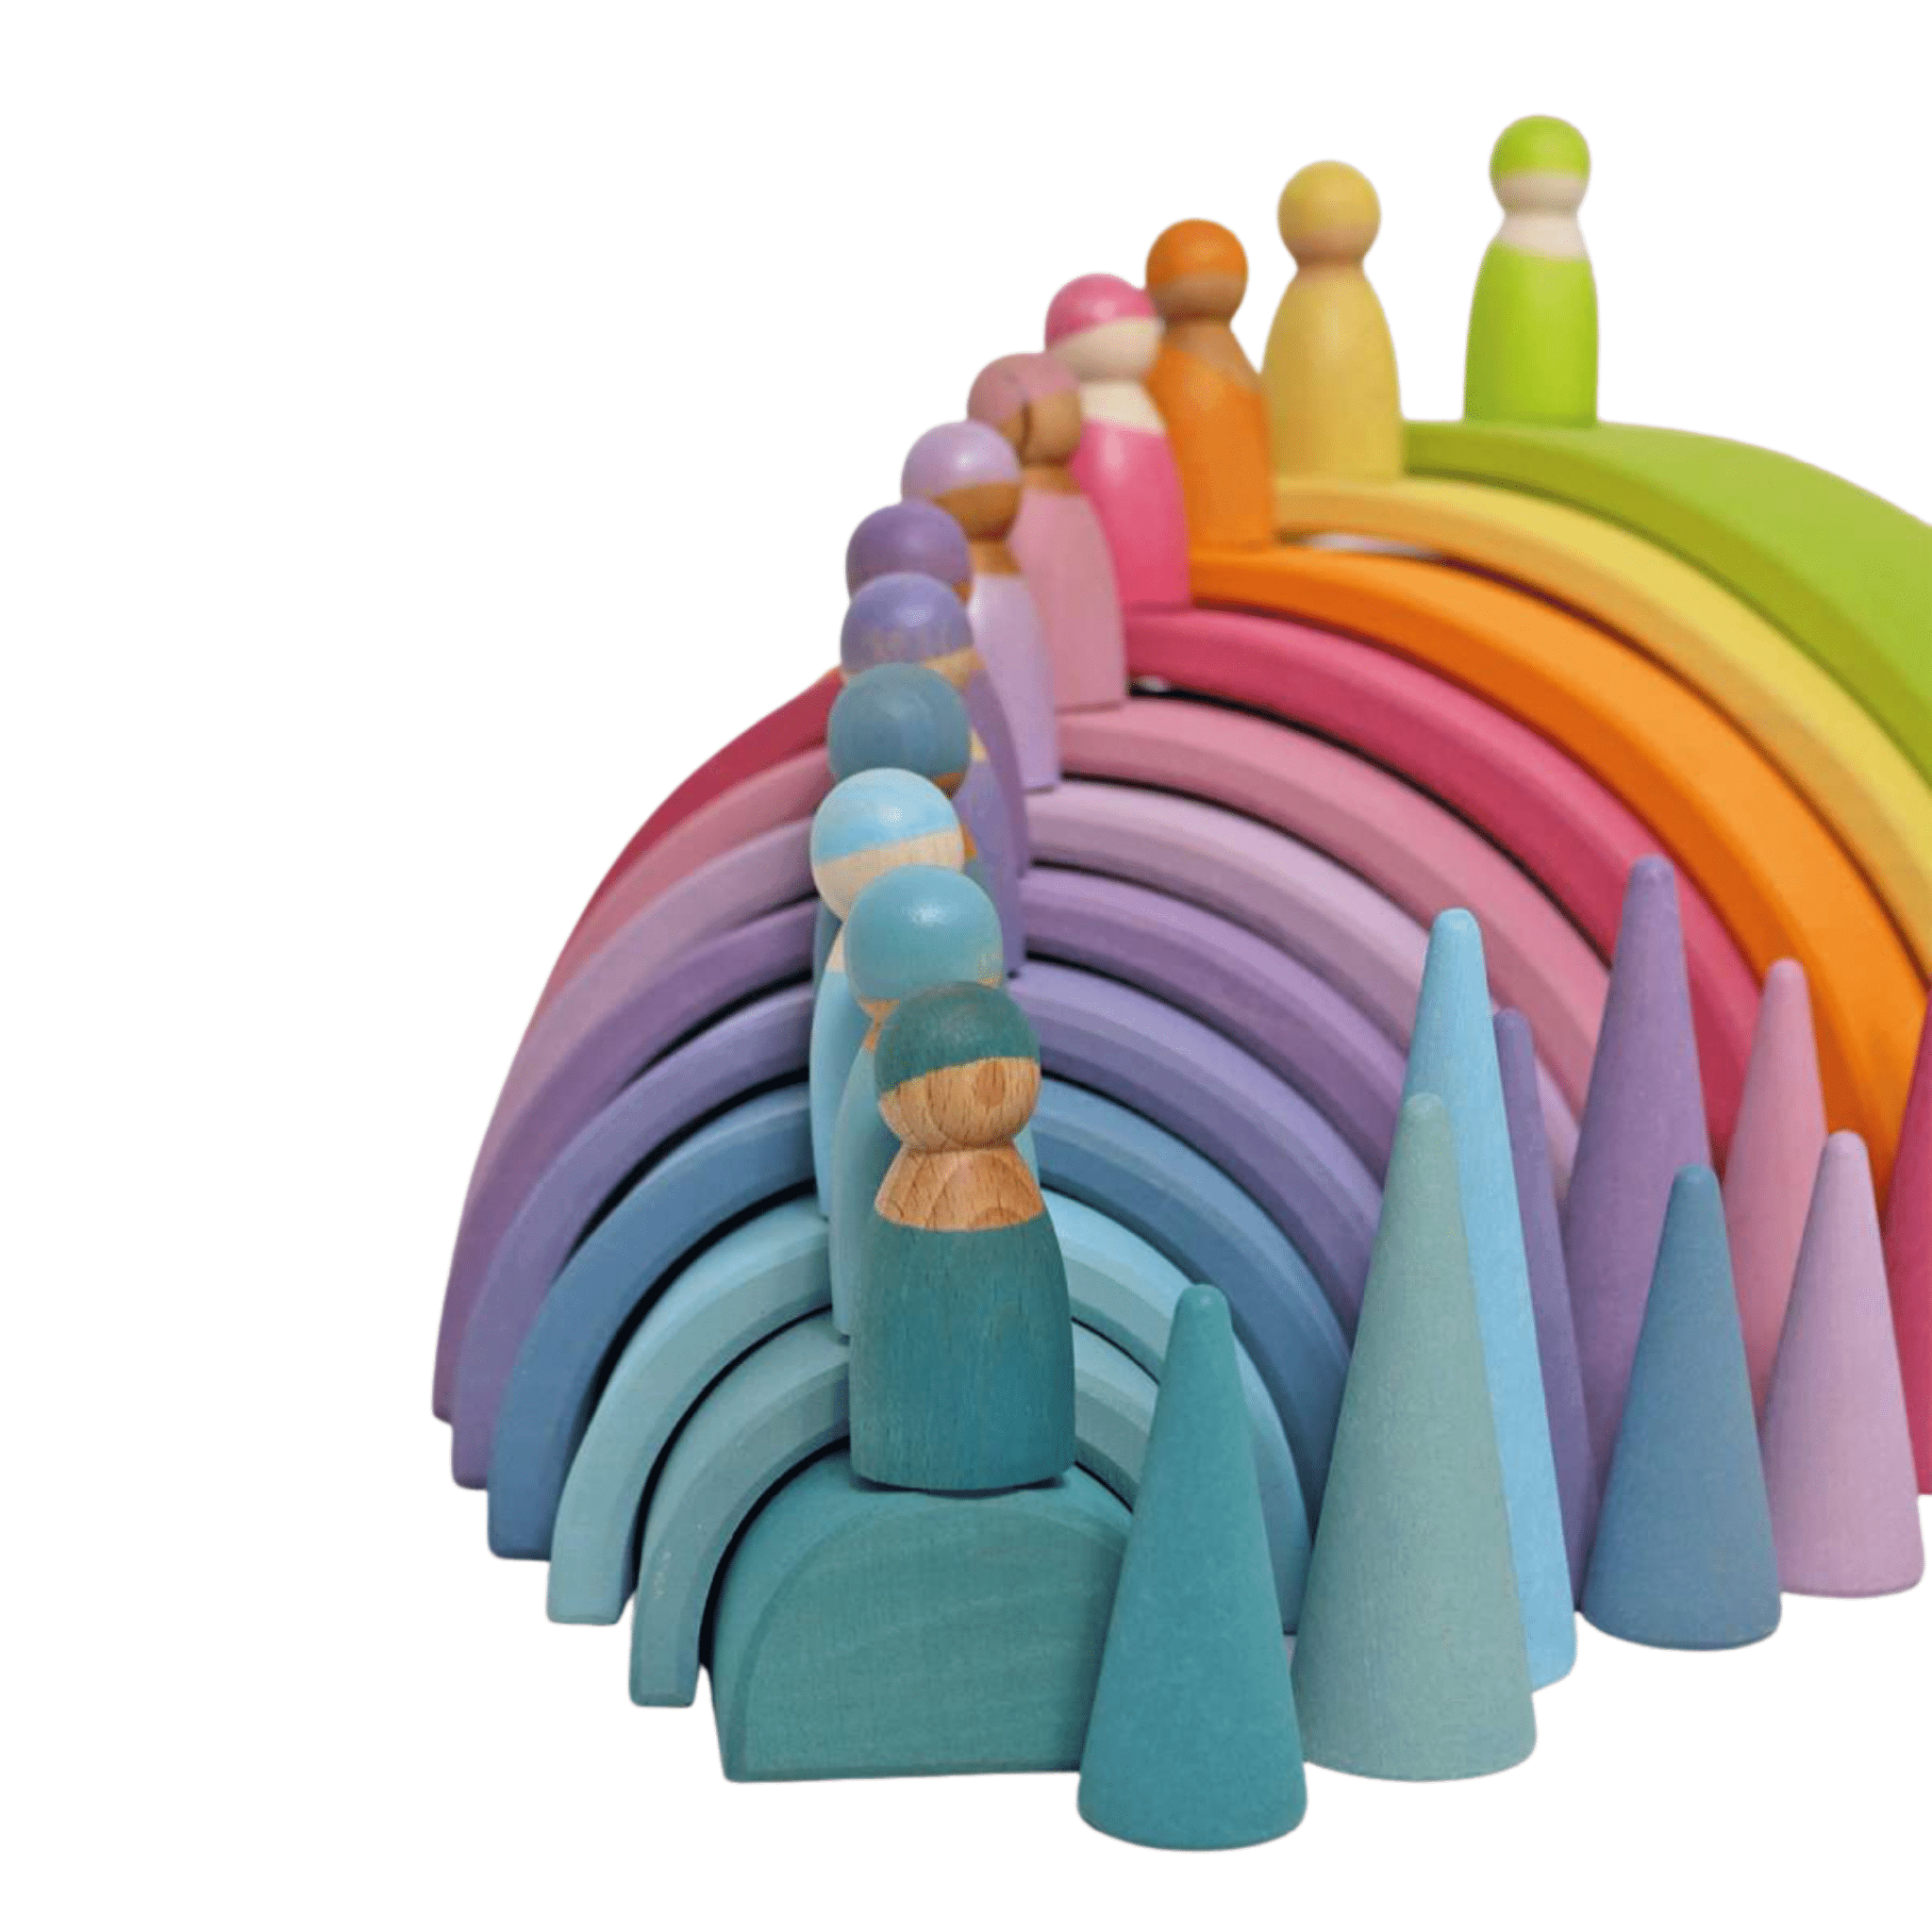 12 Pastel Wooden Peg Dolls - Why and Whale